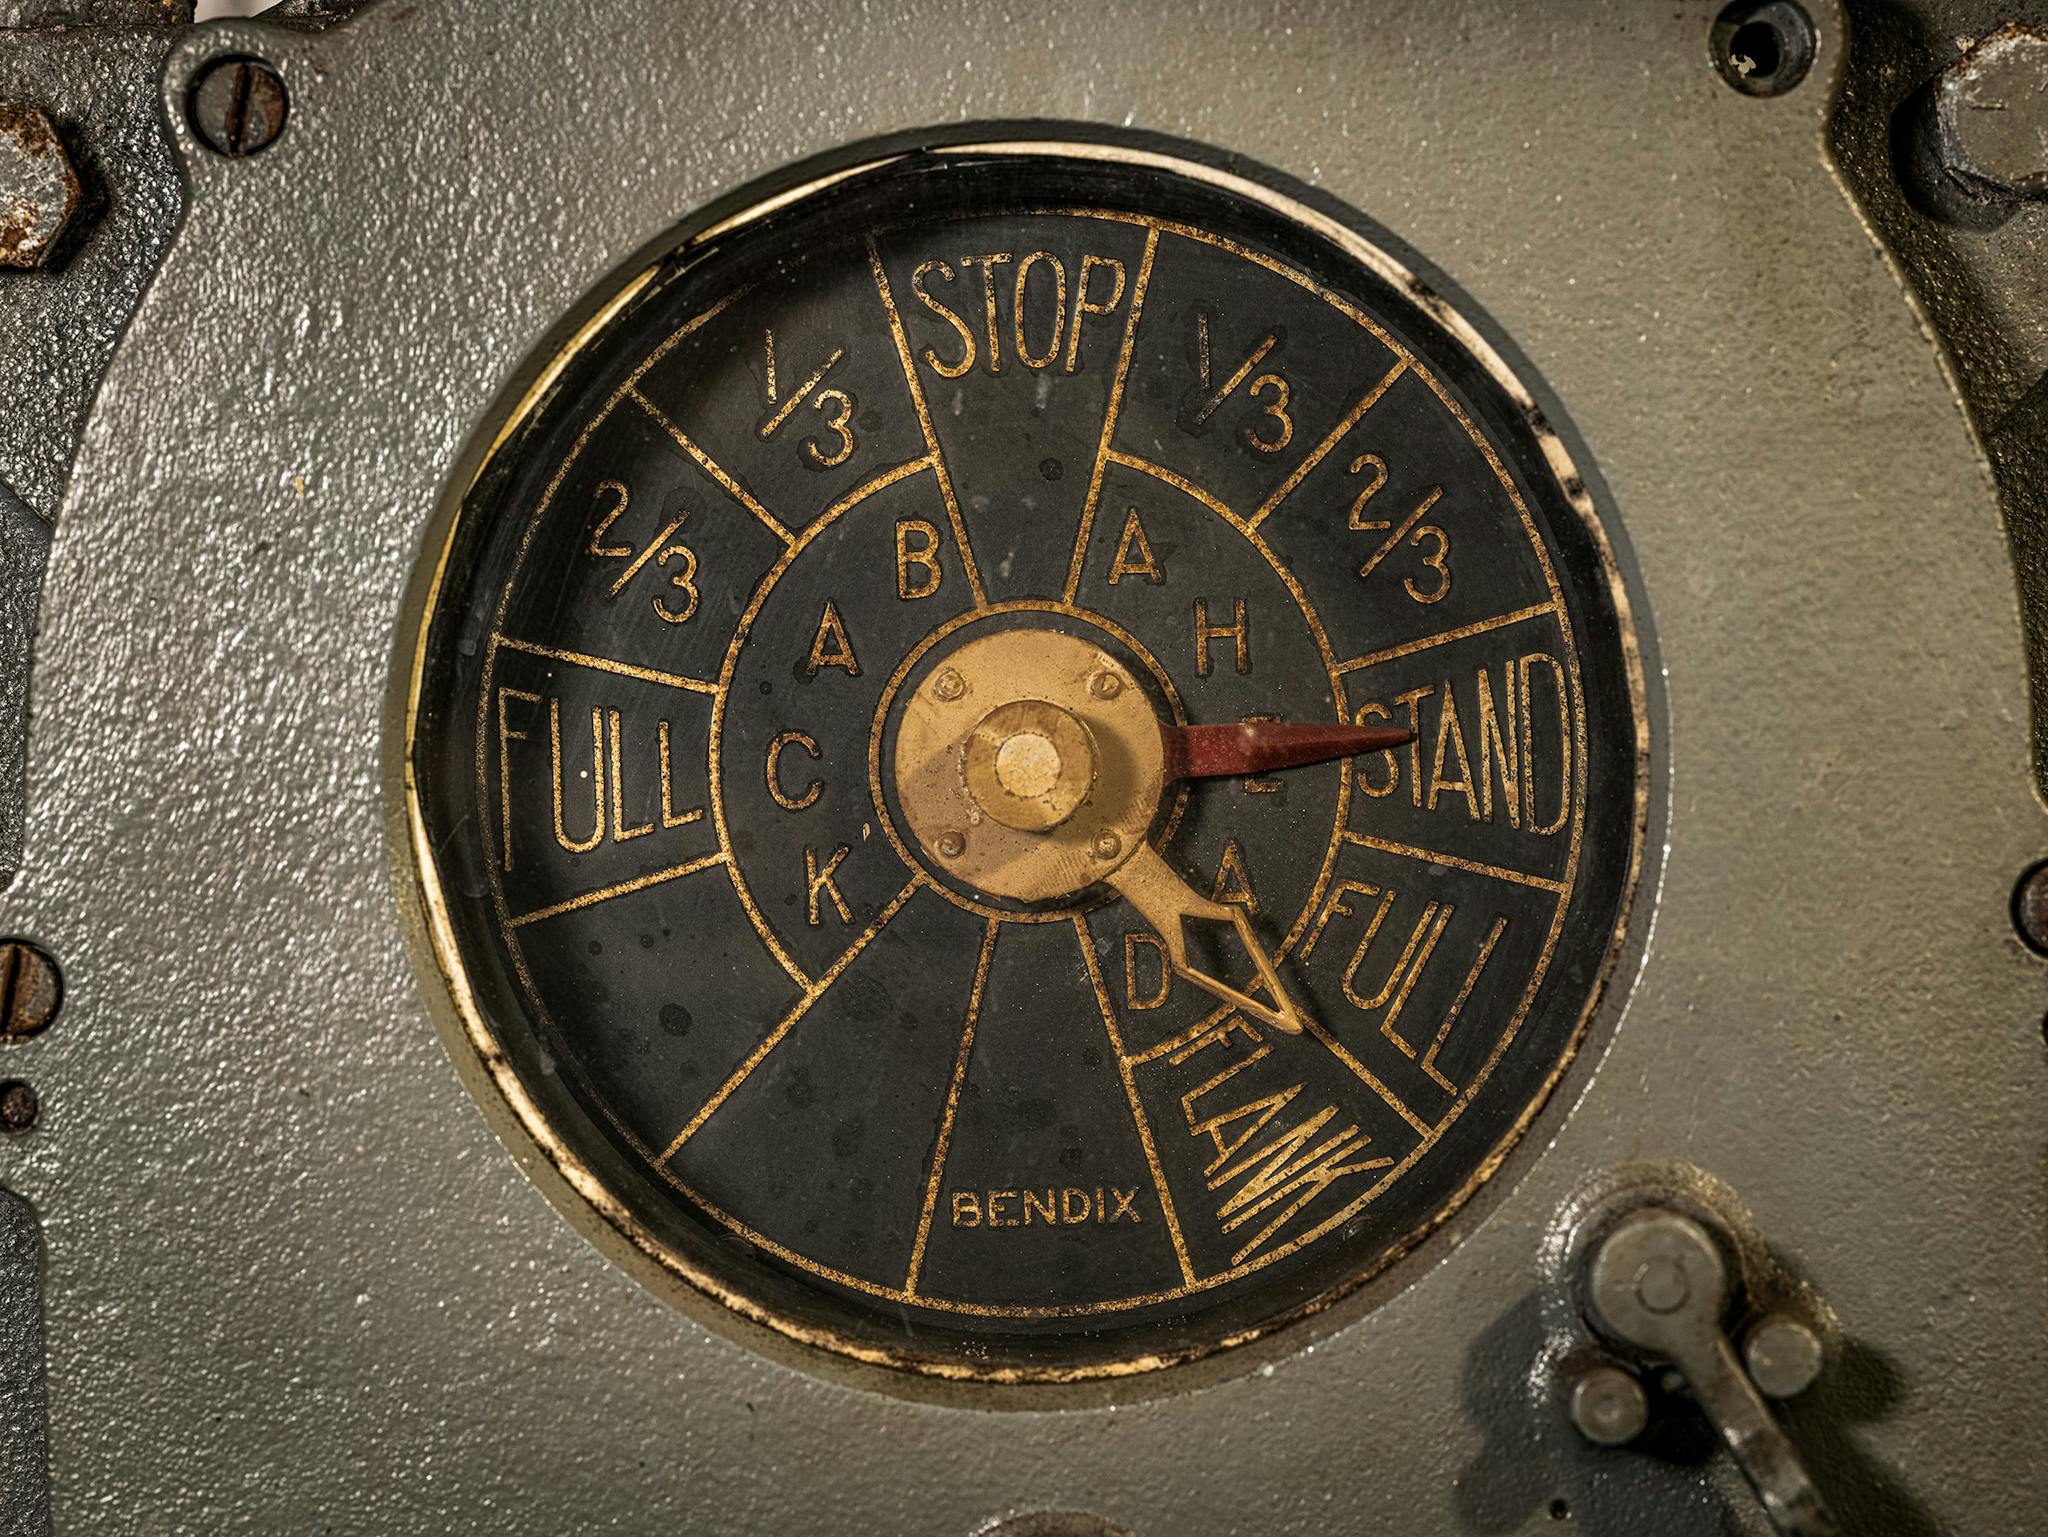 In the engine room, the red needle on the engine-order telegraph showed orders coming from the bridge. The engineer would align the white needle on the same spot, then adjust engine speed accordingly.